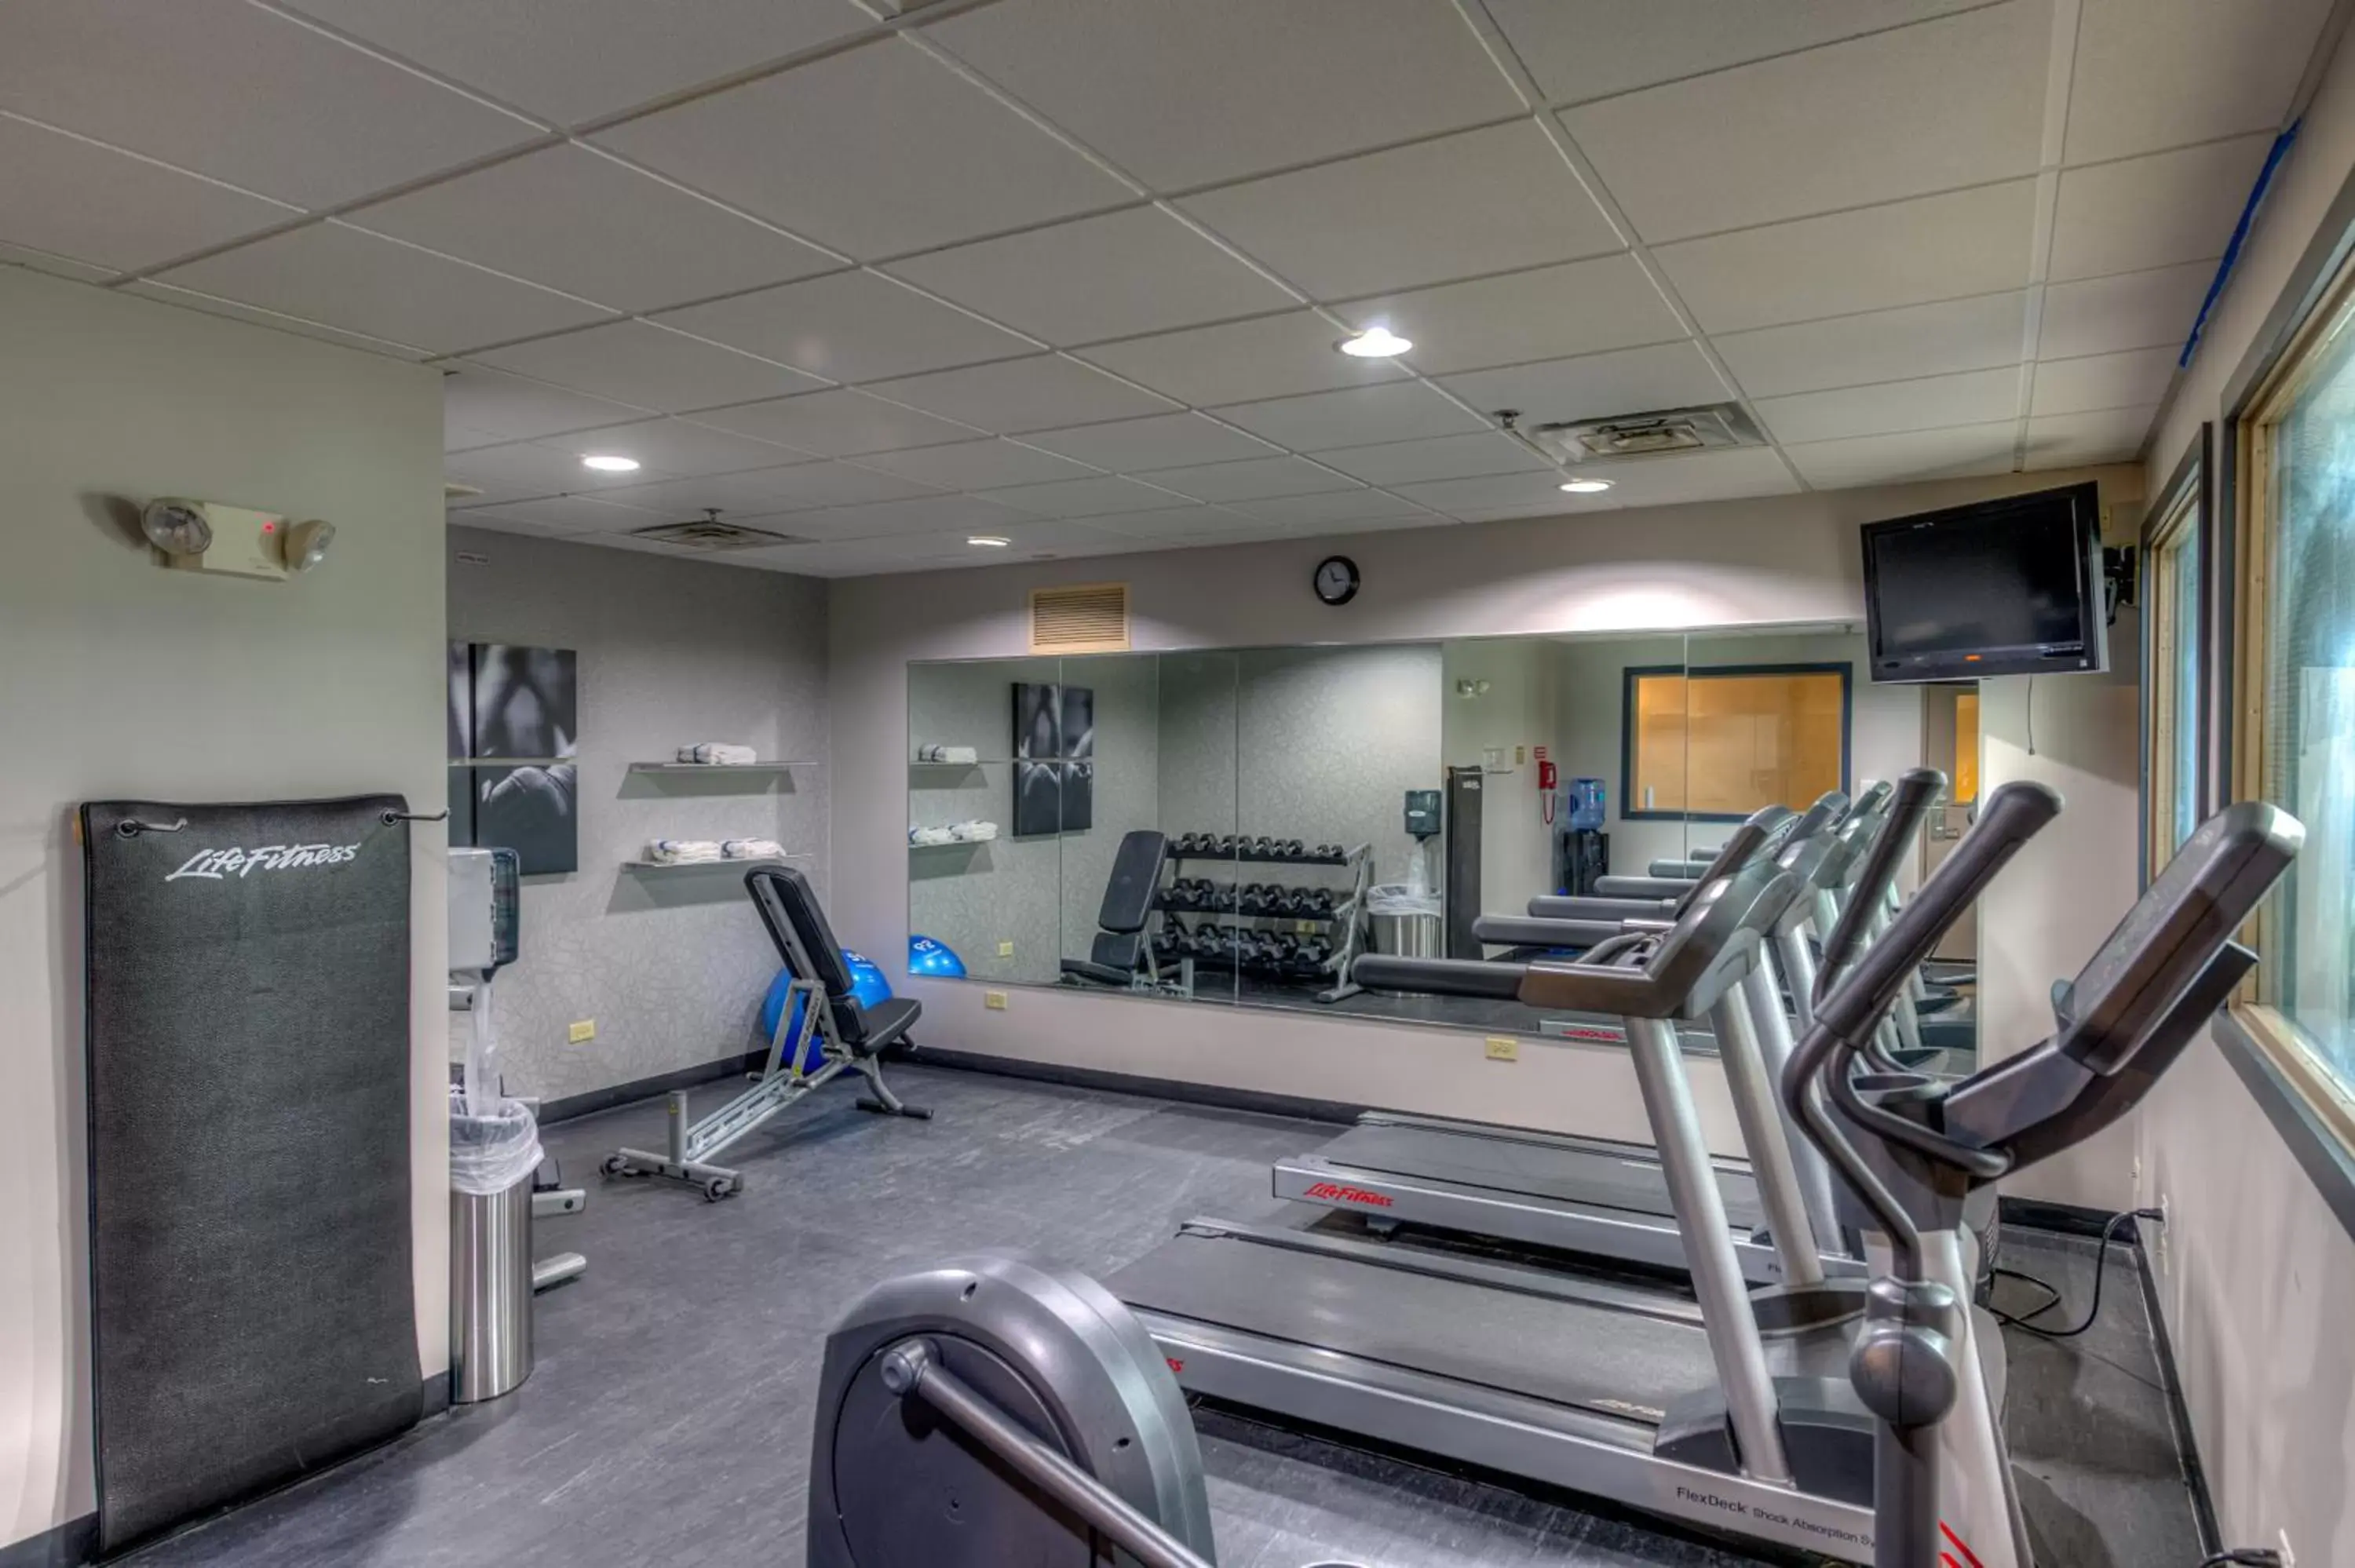 Fitness centre/facilities, Fitness Center/Facilities in Country Inn & Suites by Radisson, Crystal Lake, IL